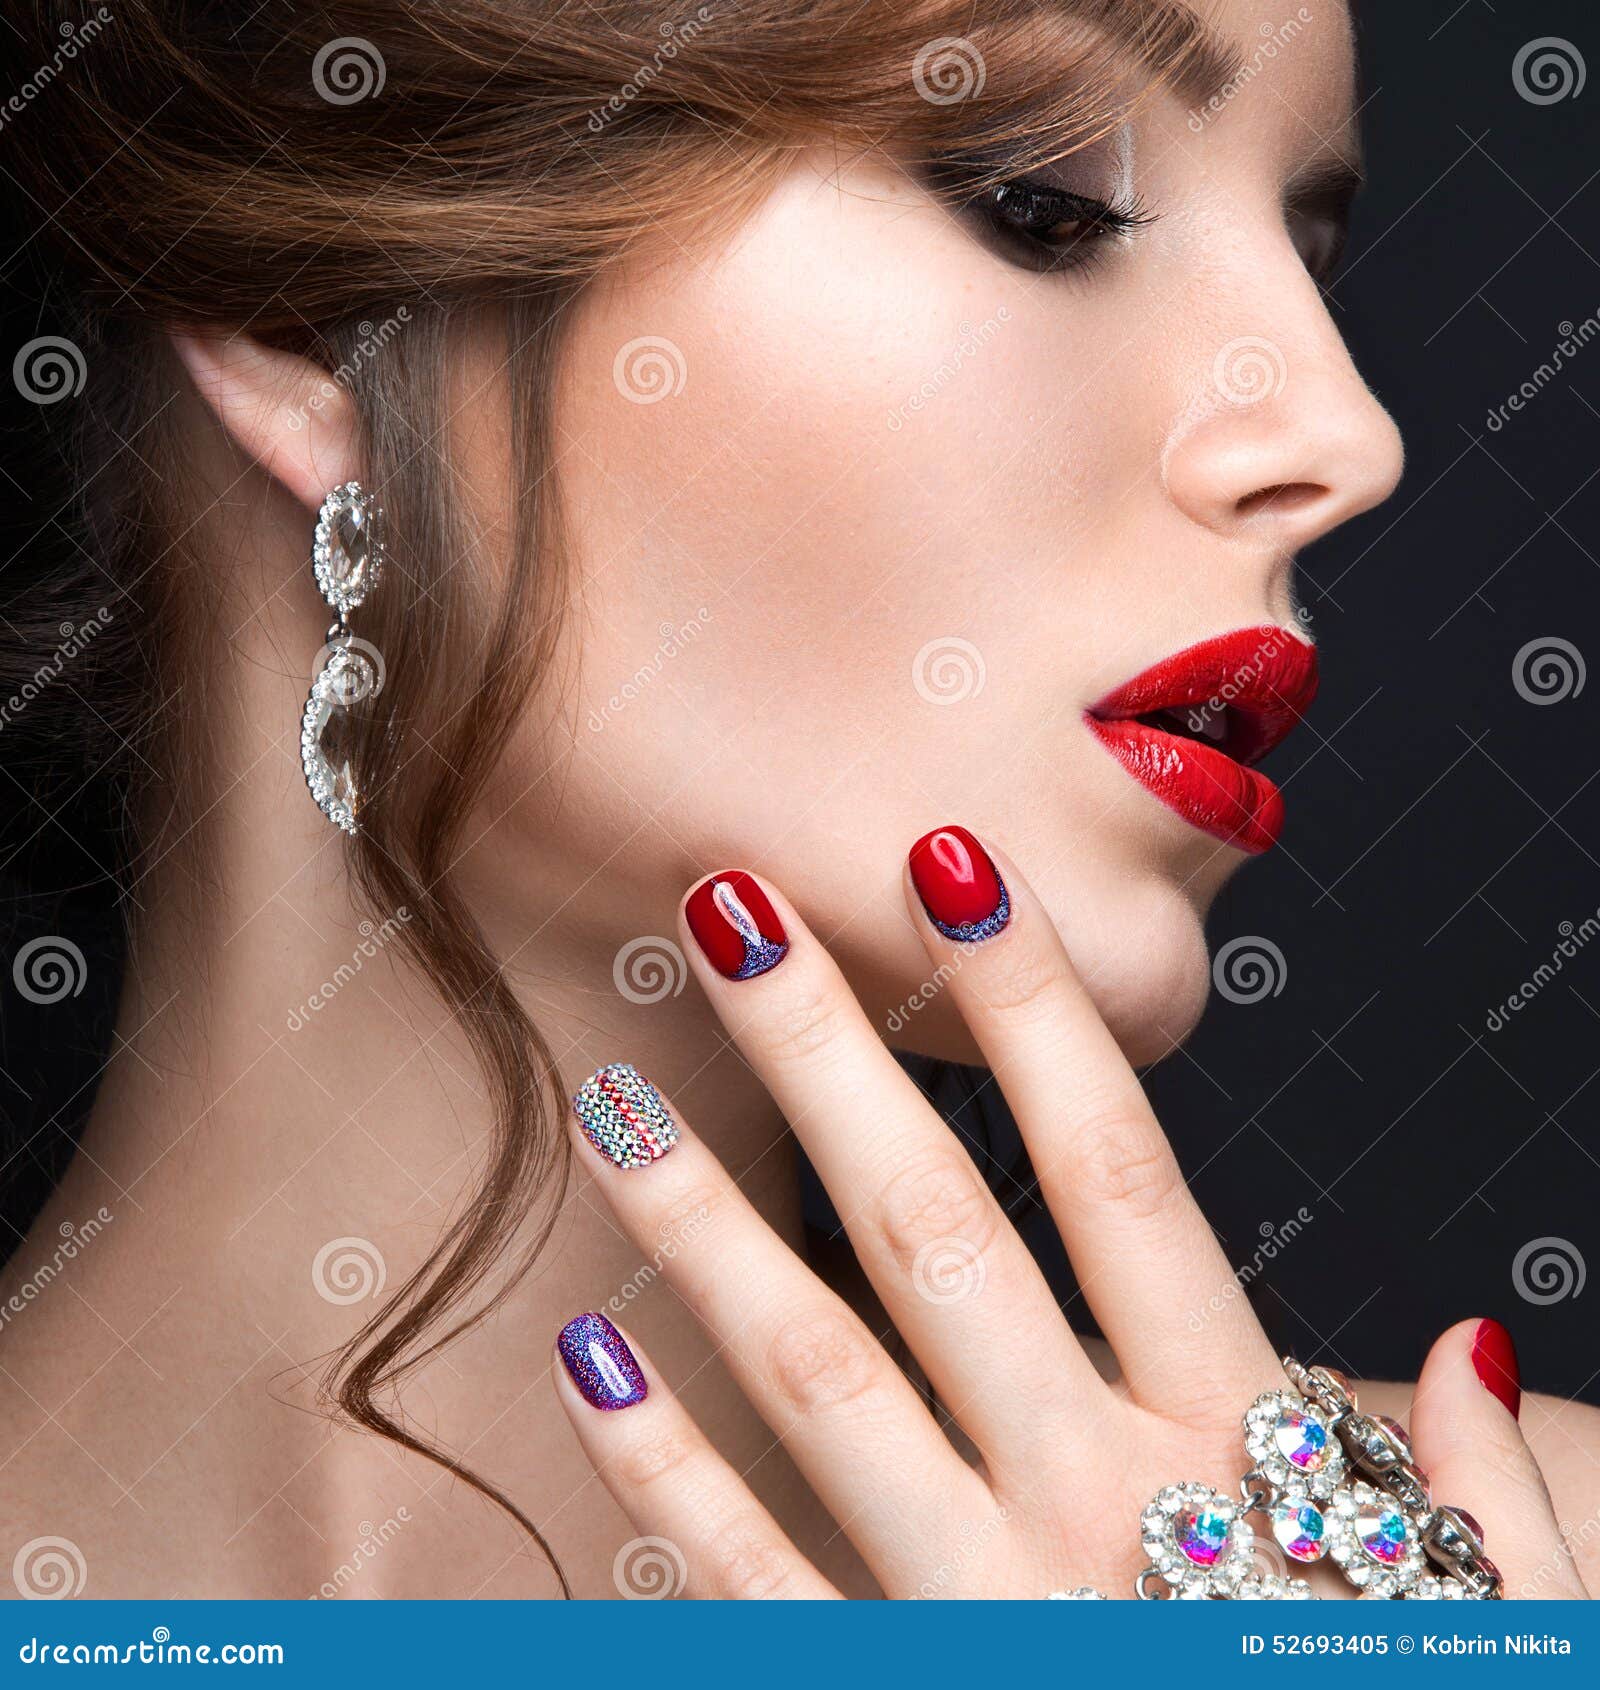 beautiful girl with a bright evening make-up and red manicure with rhinestones. nail . beauty face.